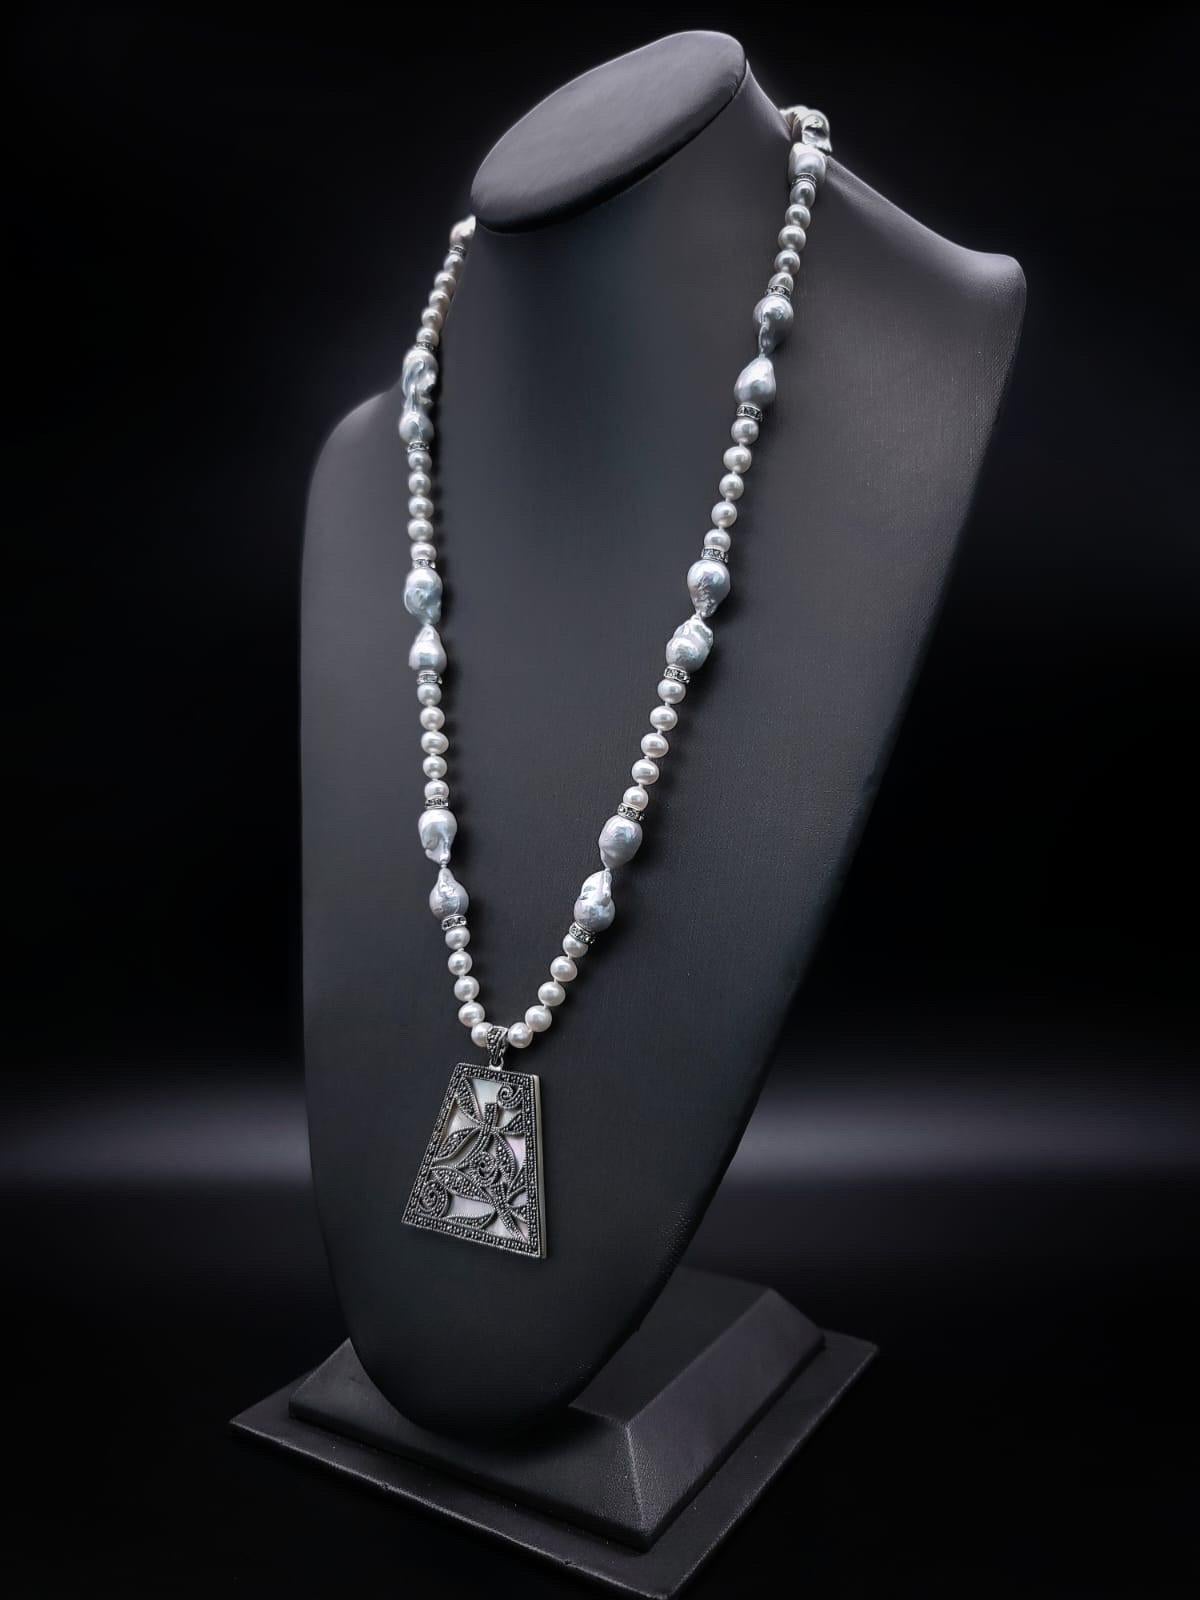 One-of-a-Kind

A fresh take on Marcasite, in a newly designed pendant set on Mother-of-Pearl in the deco style. The pendant is suspended from a 36’’ strand of Baroque Pearls interspersed with 5 m.m pearls and CZ roundels. Finished with a silvery